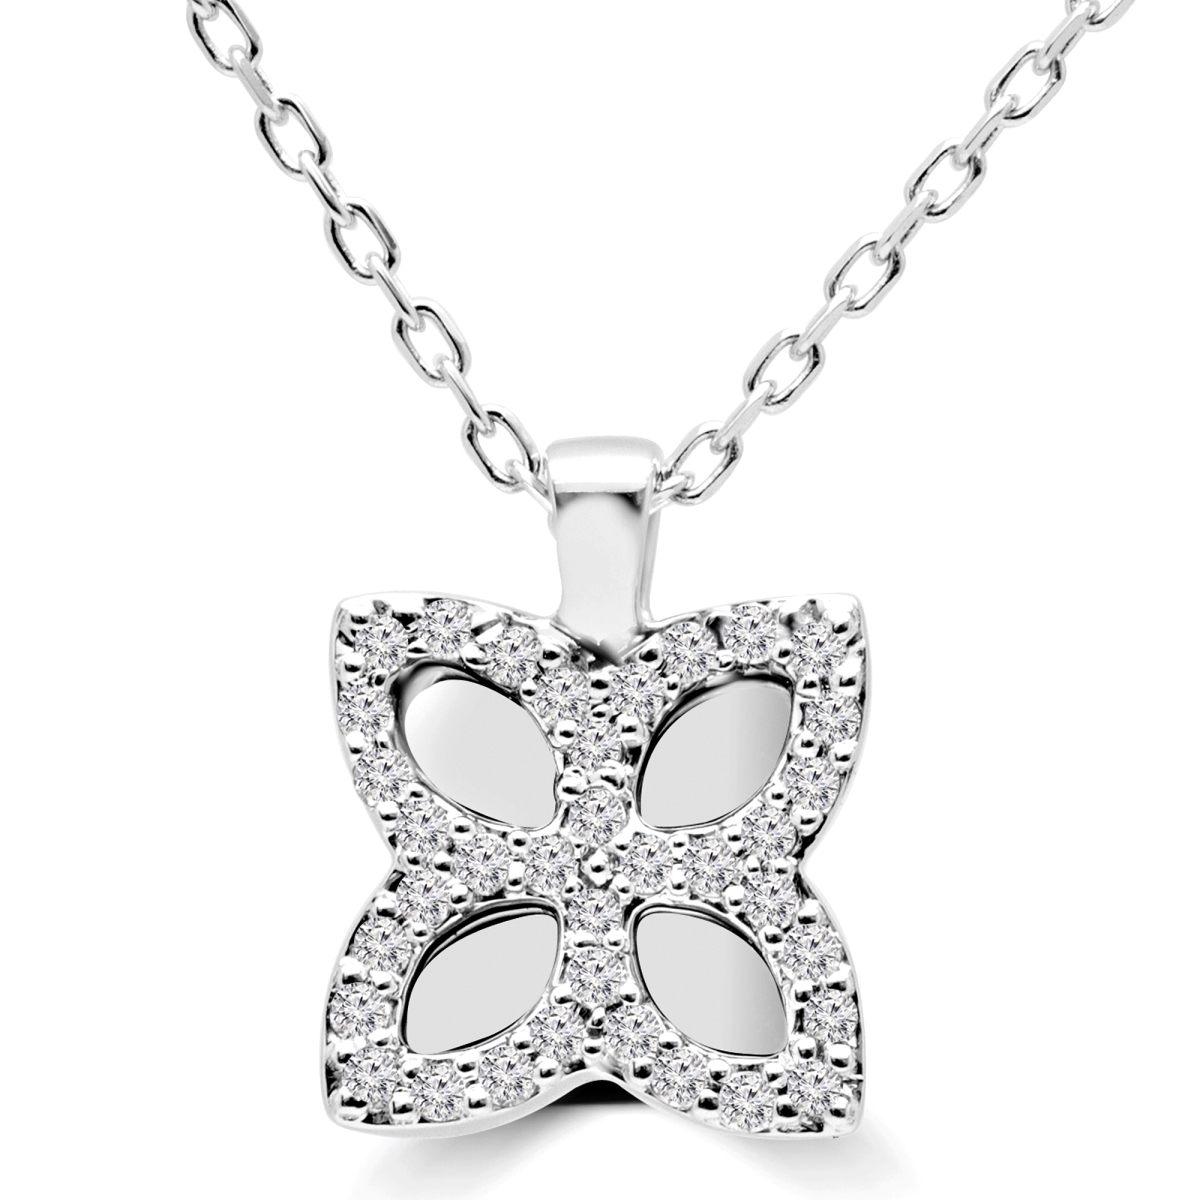 Mdr170156 0.1 Ctw Round Diamond Fancy Pendant Necklace In 14k